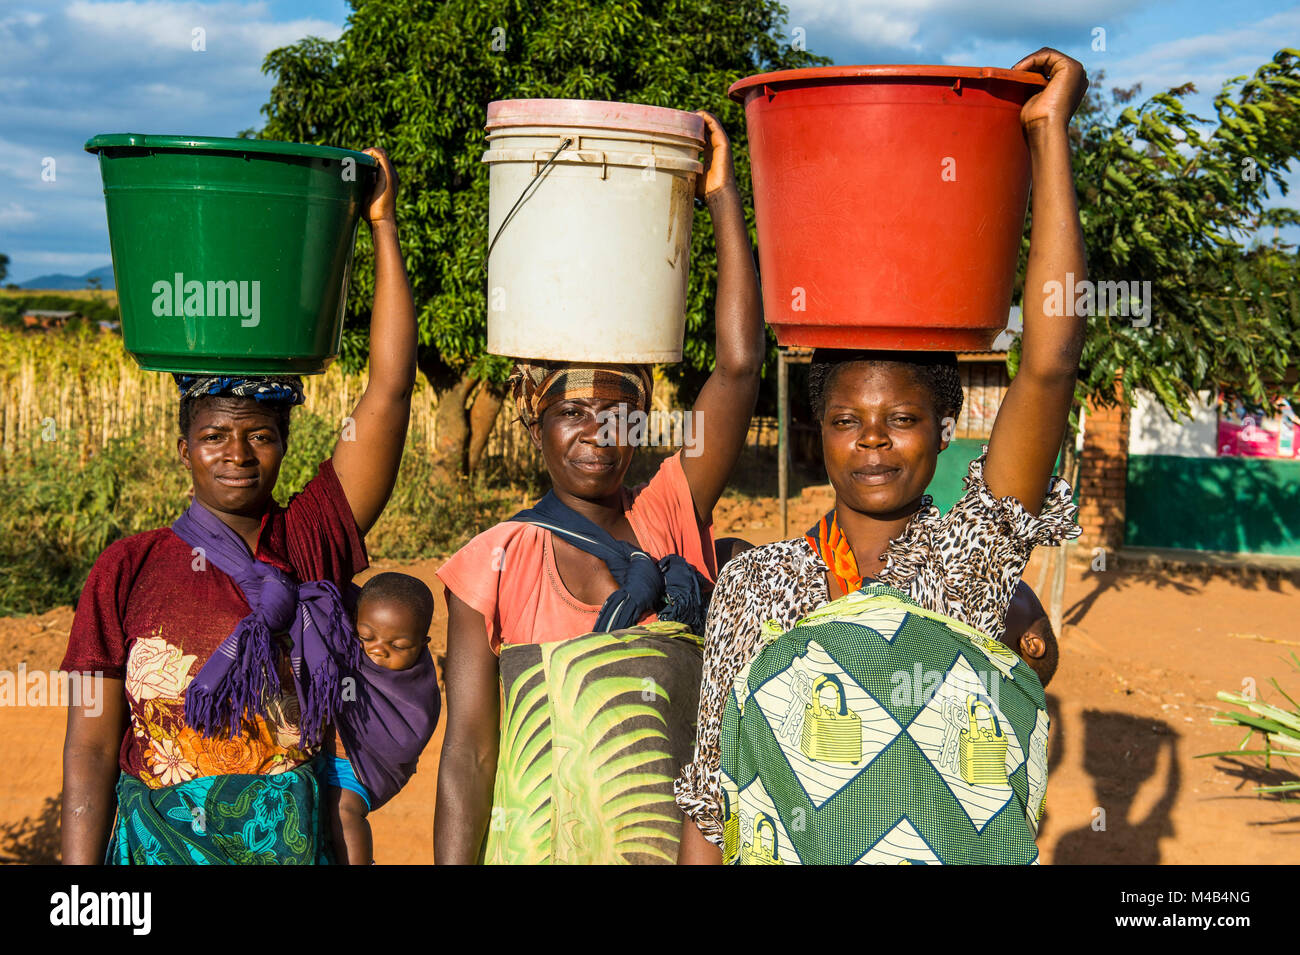 Local women carrying buckets on their head,Malawi,Africa Stock Photo